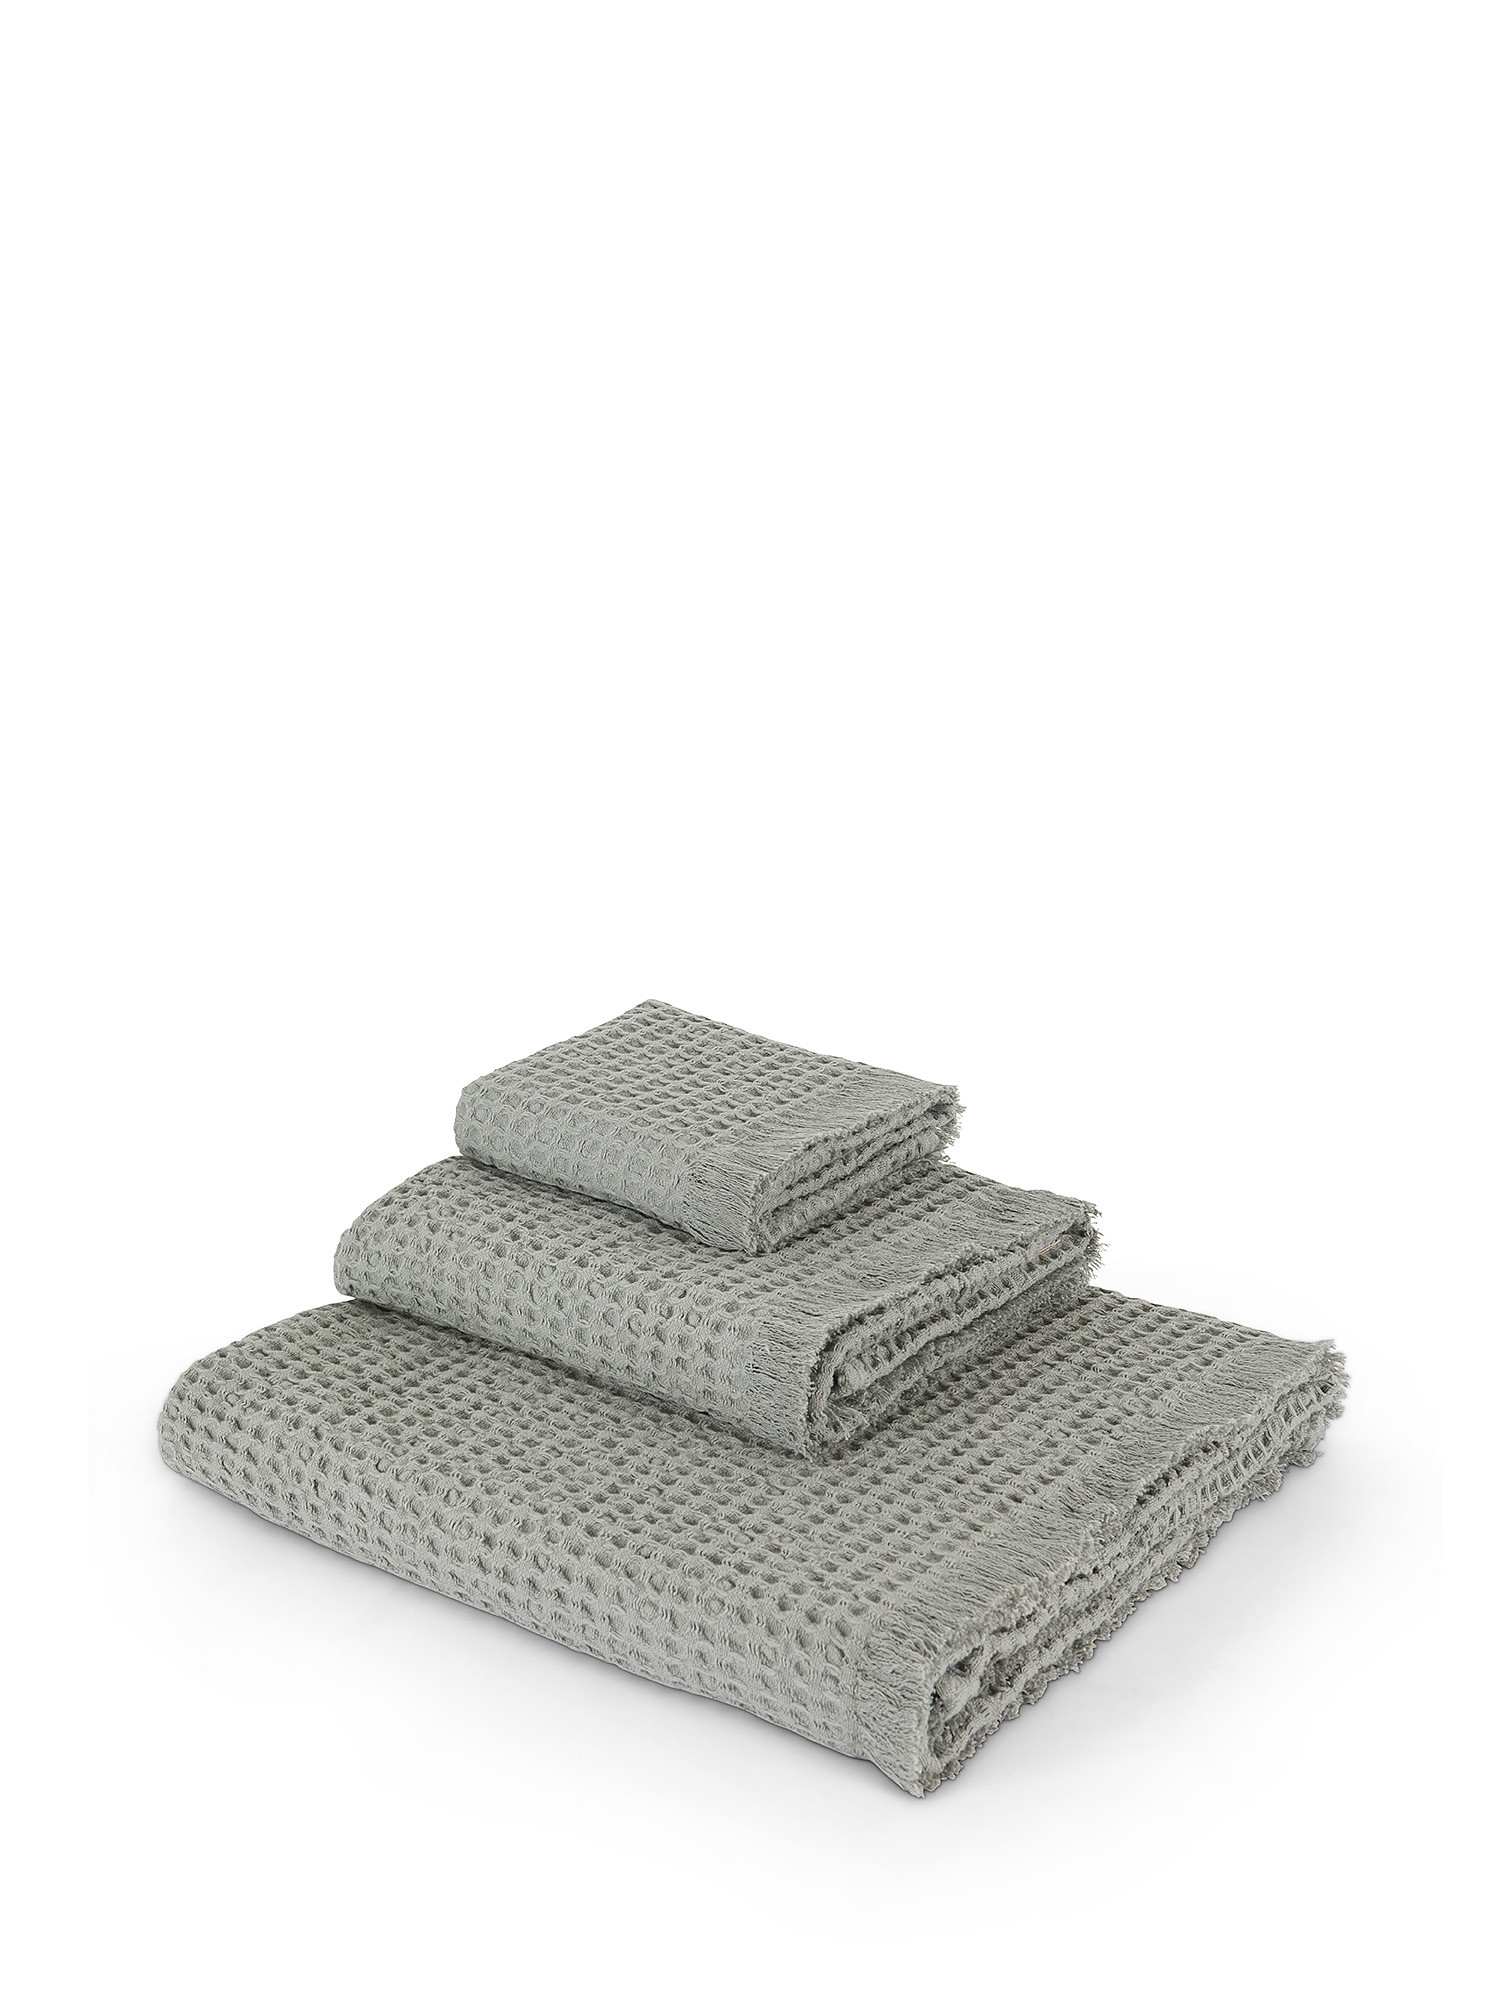 Thermae honeycomb cotton towel, Grey, large image number 0